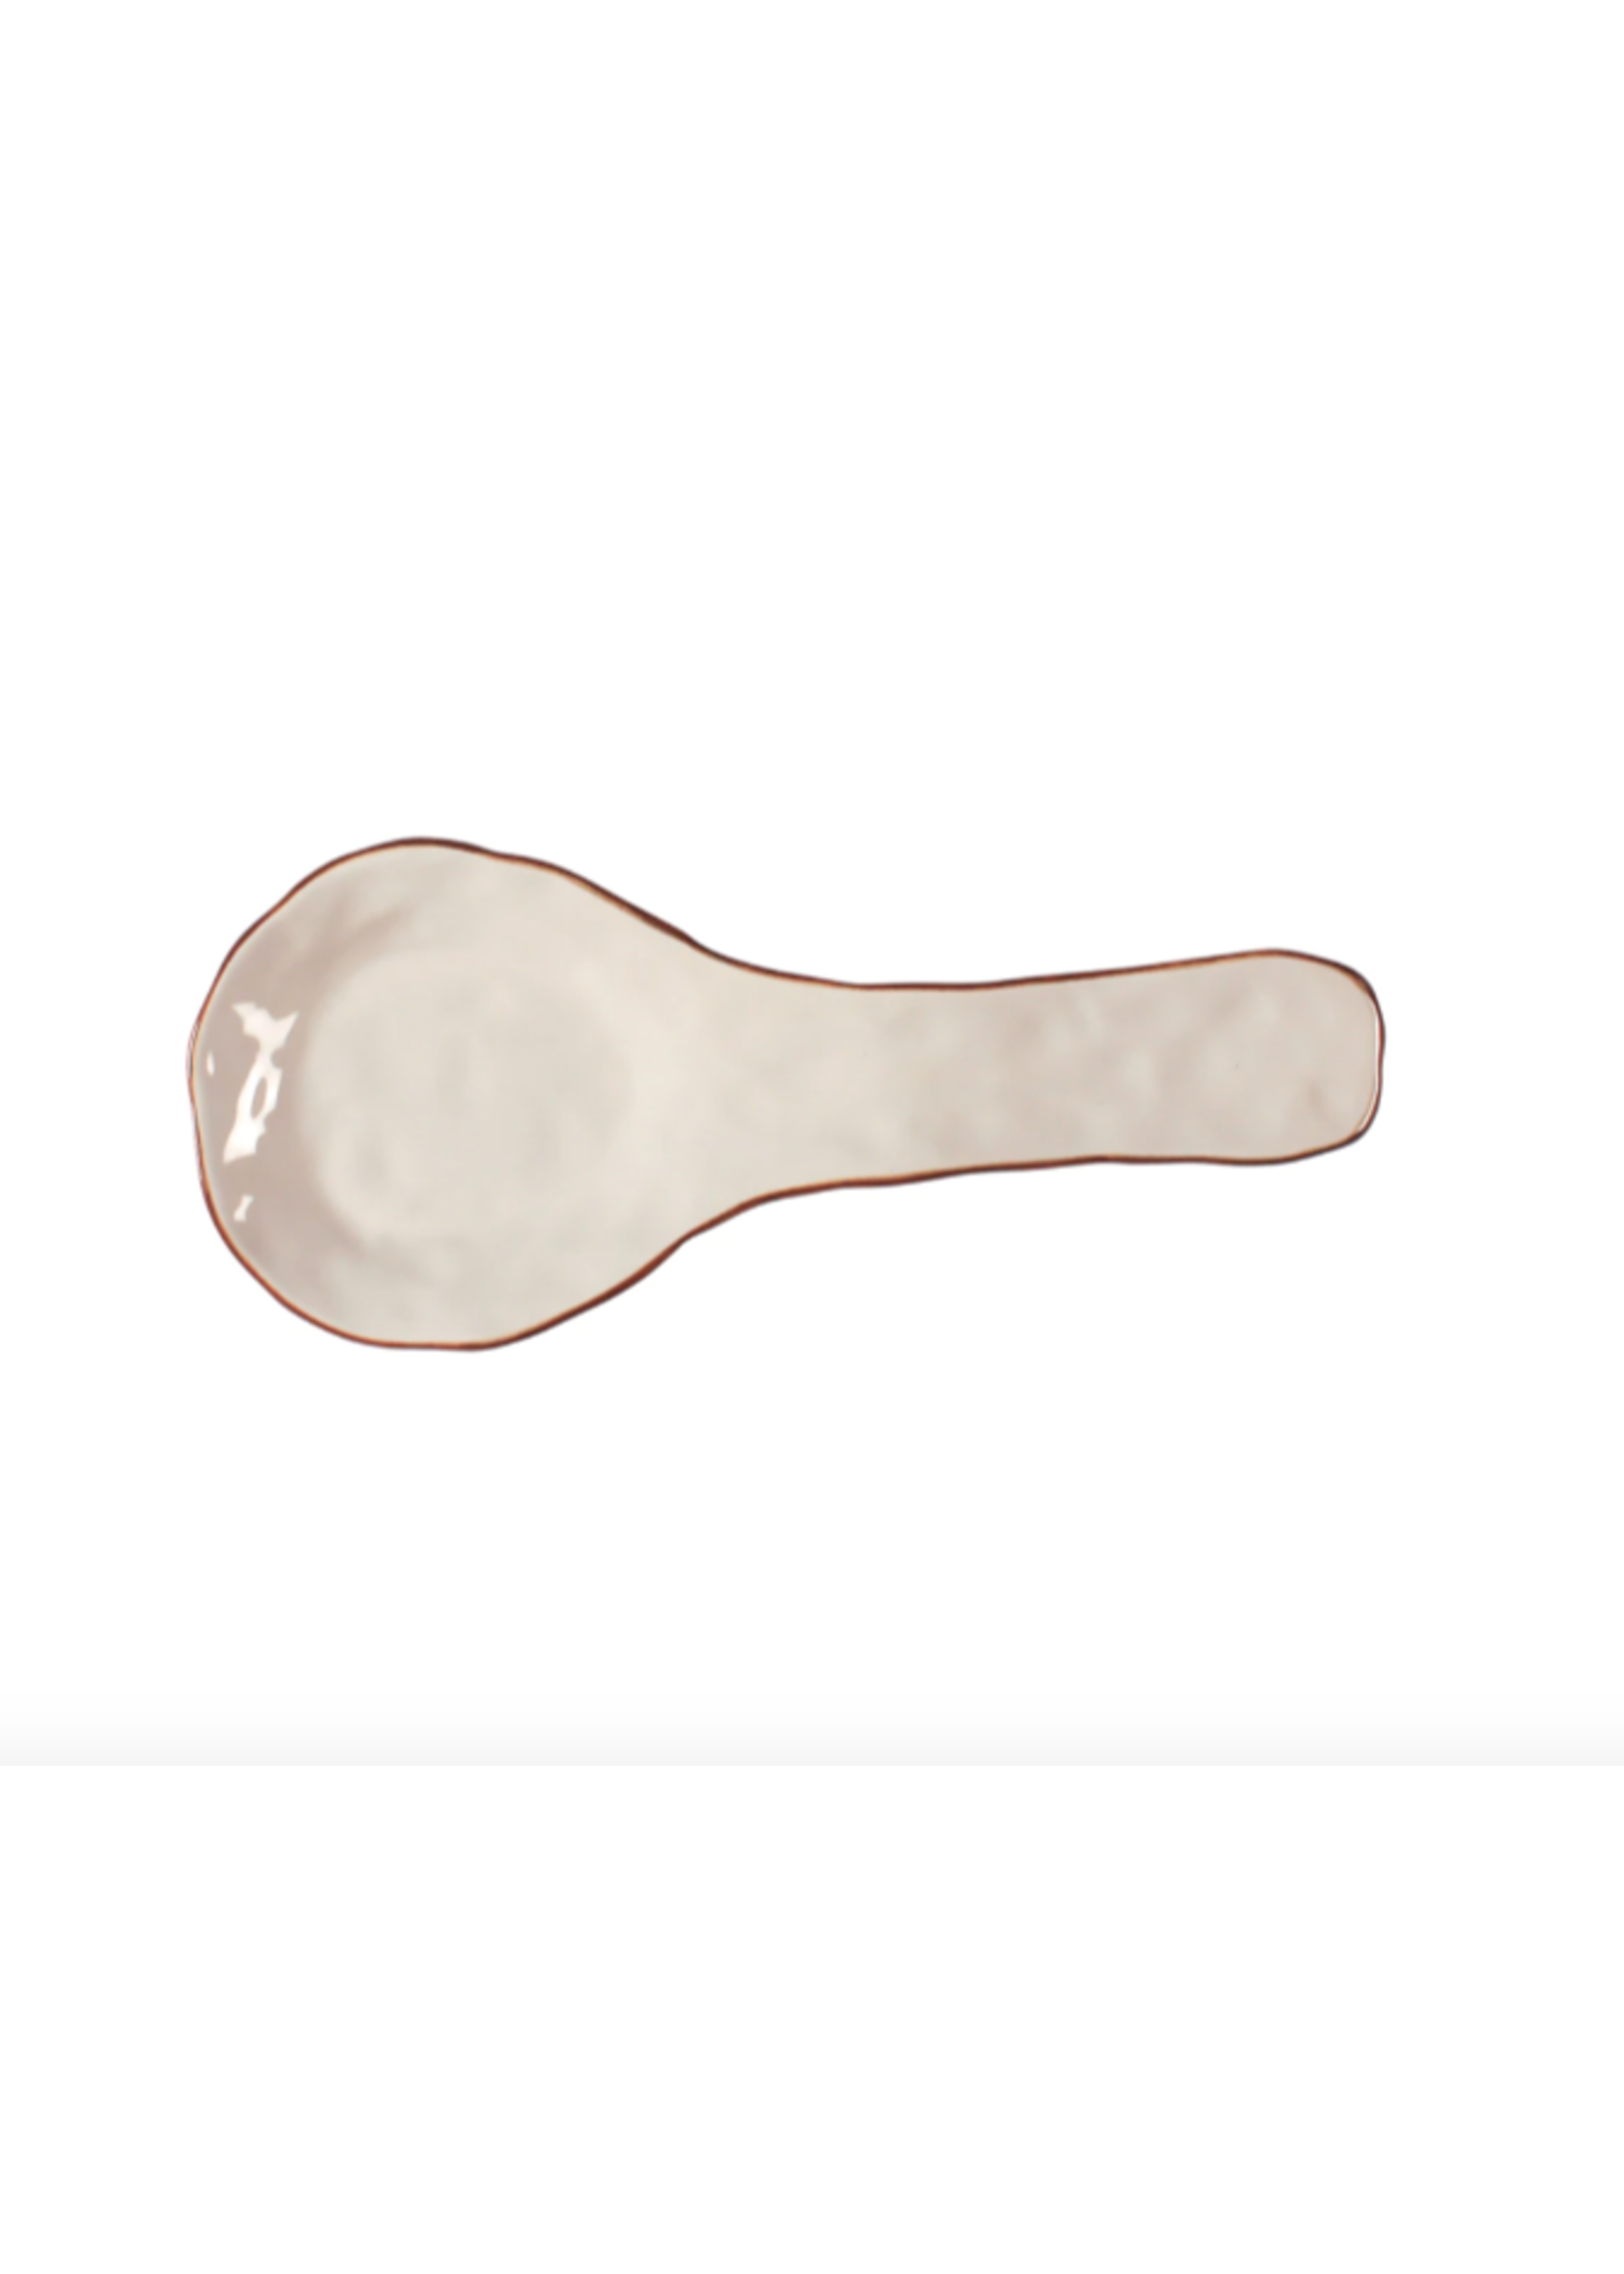 Skyros Designs Cantaria Spoon Rest Ivory